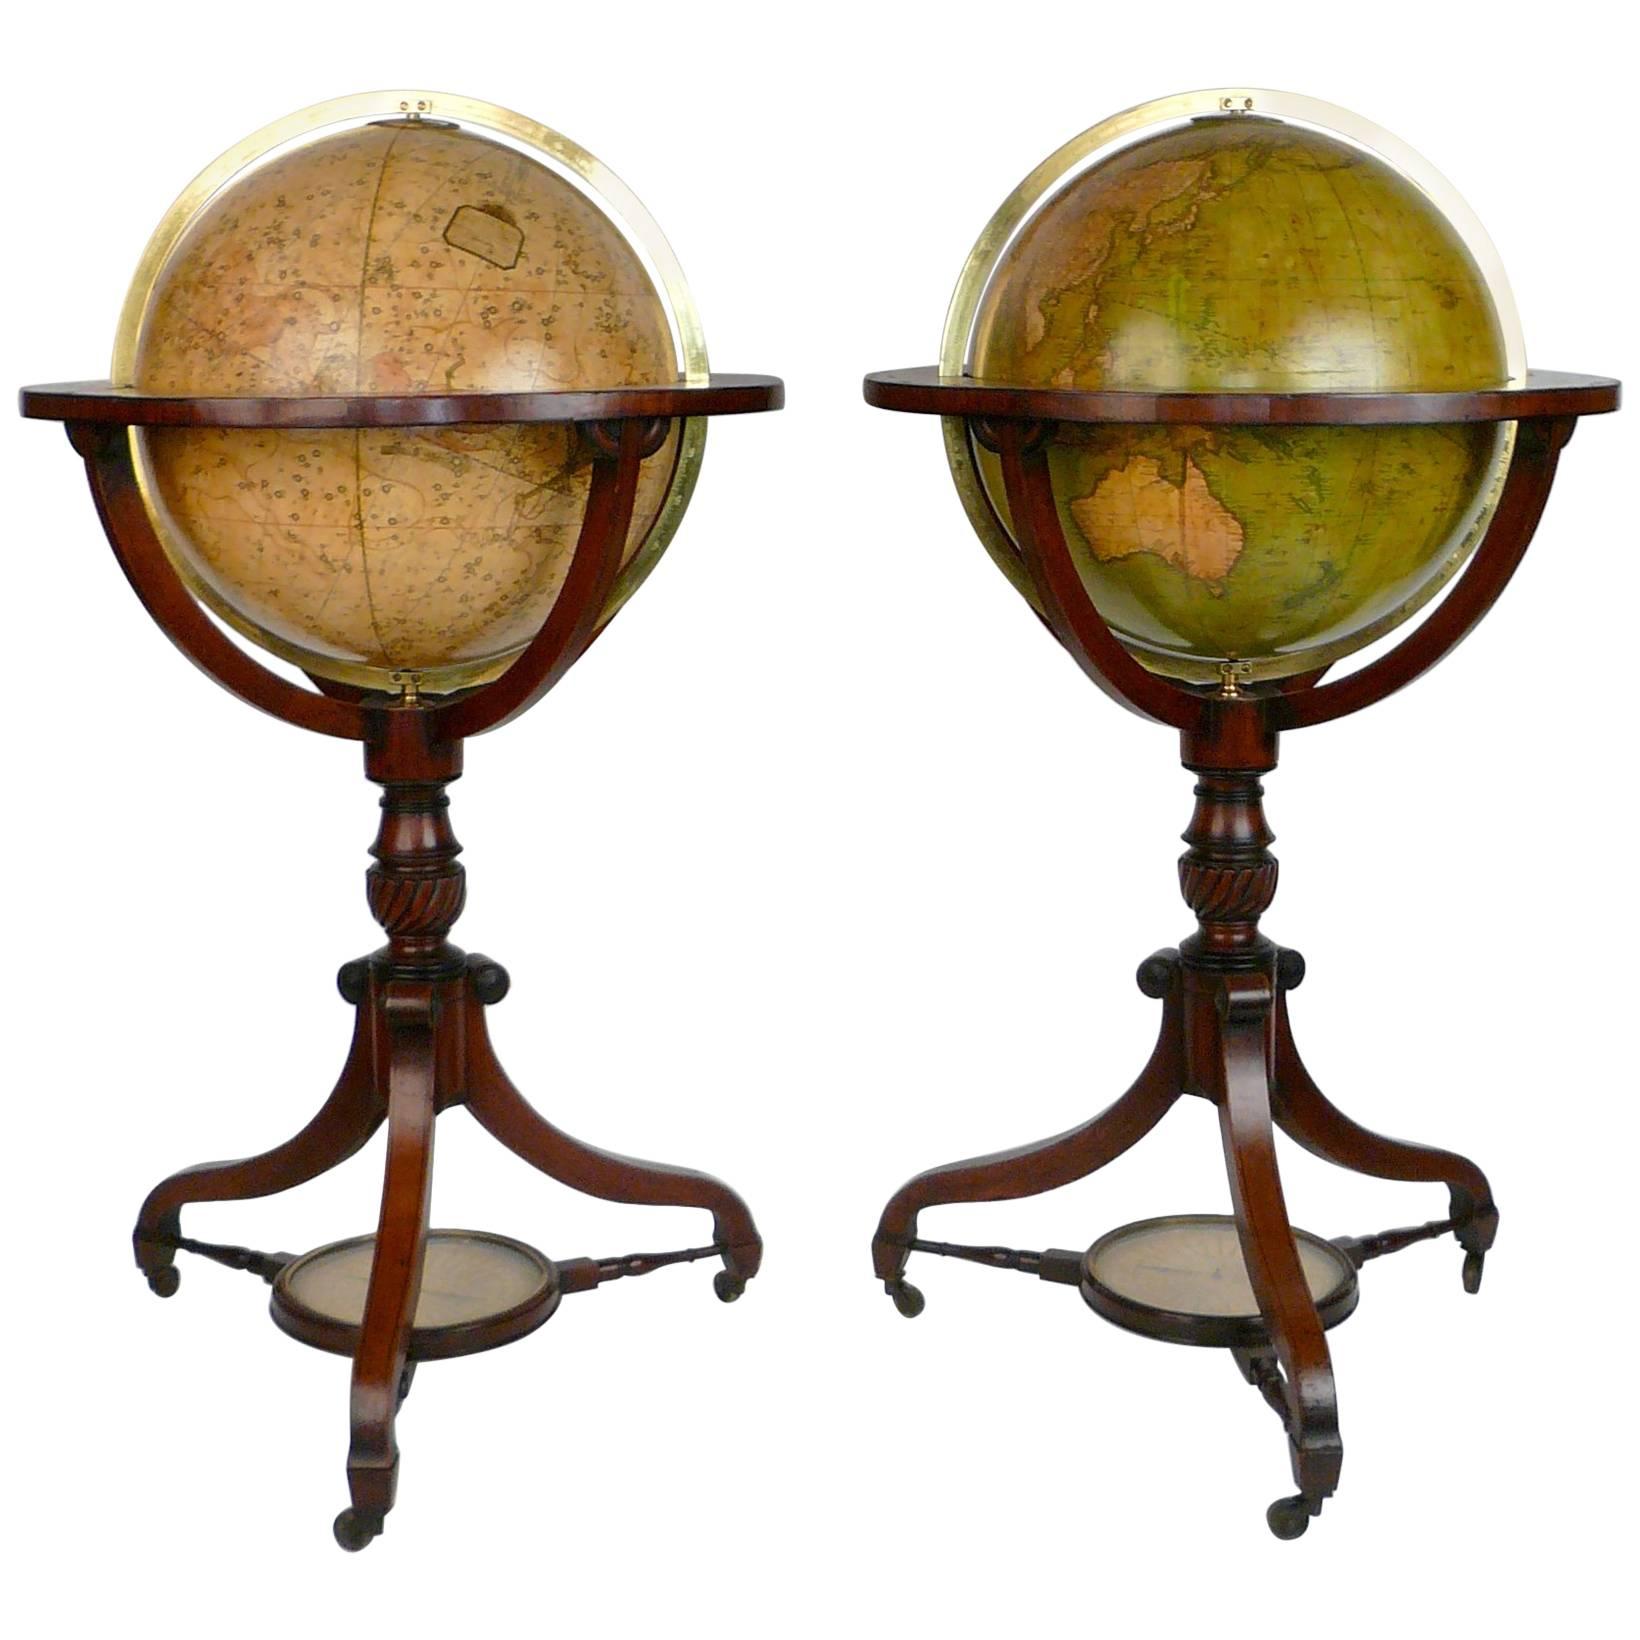 Fine and Rare Pair of English Regency Floor Standing Library Globes